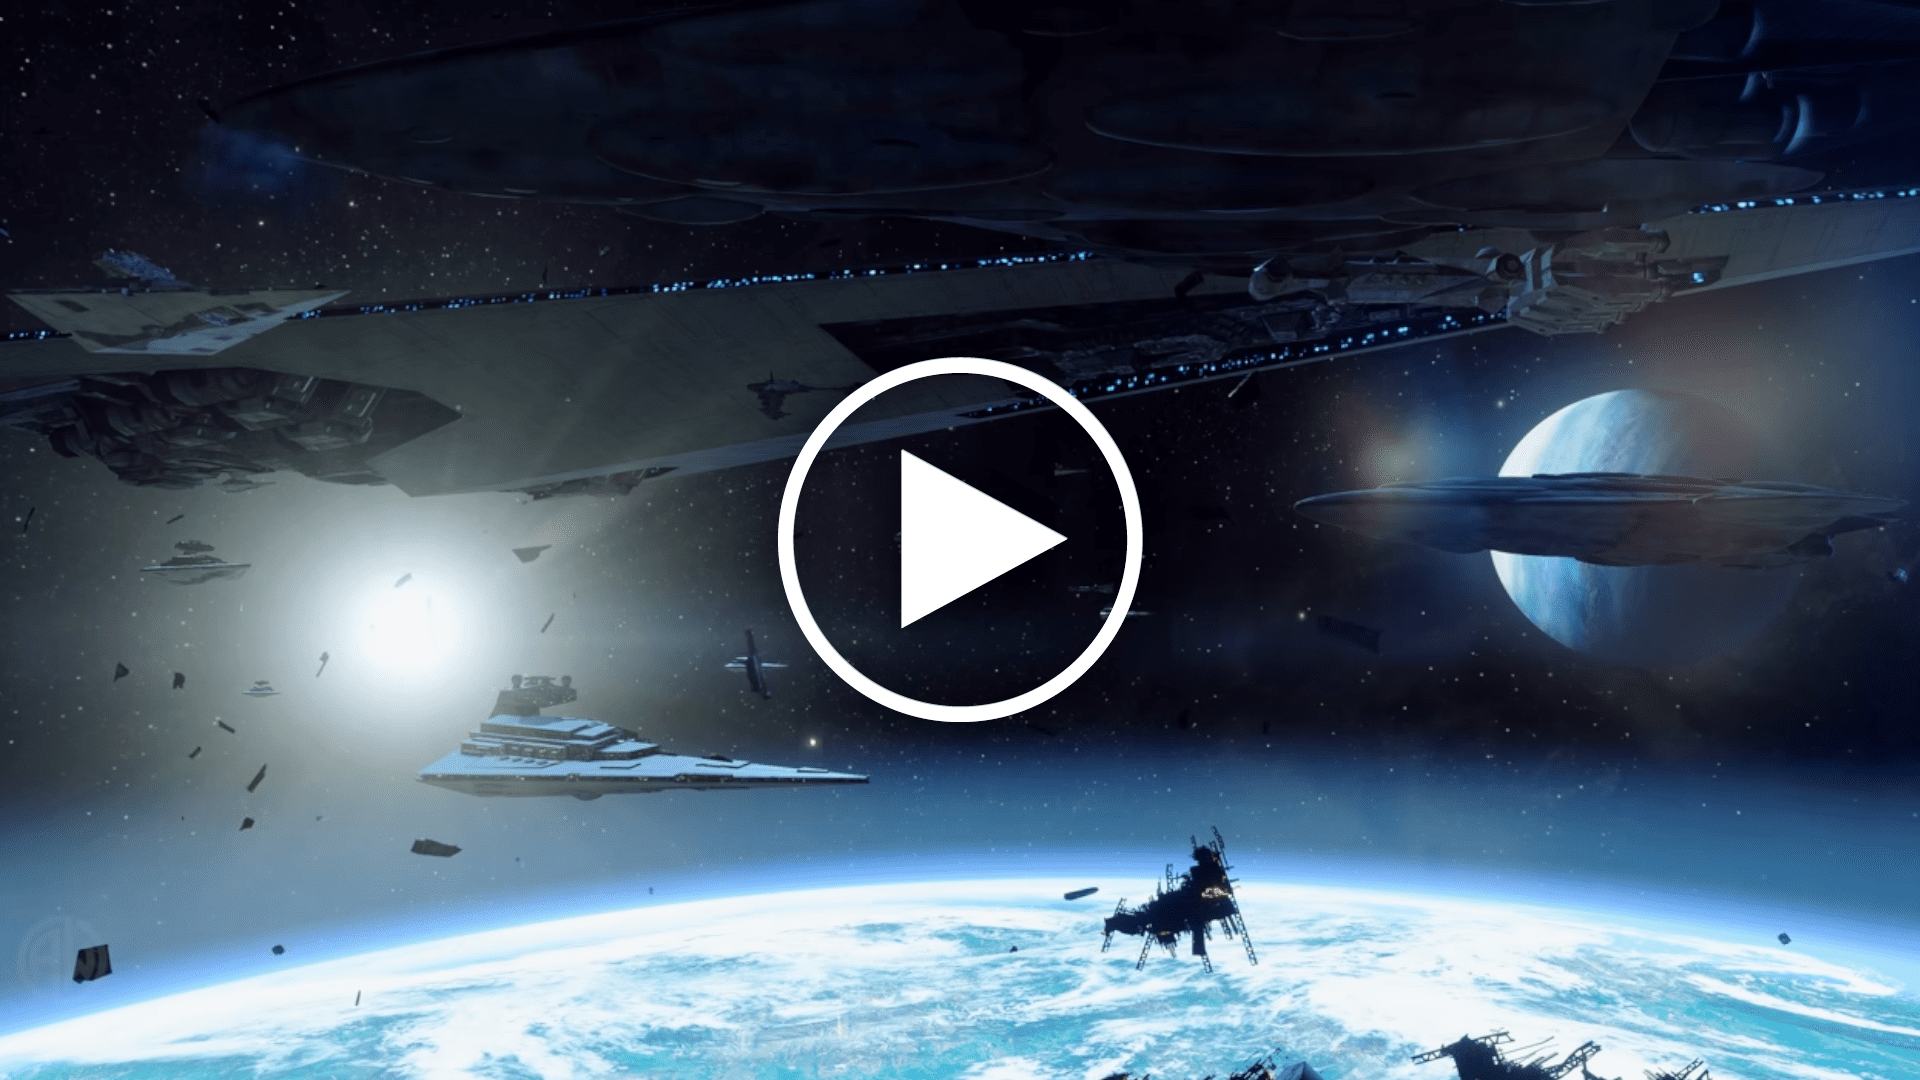 Star Wars Space Battle Video Background for Zoom 